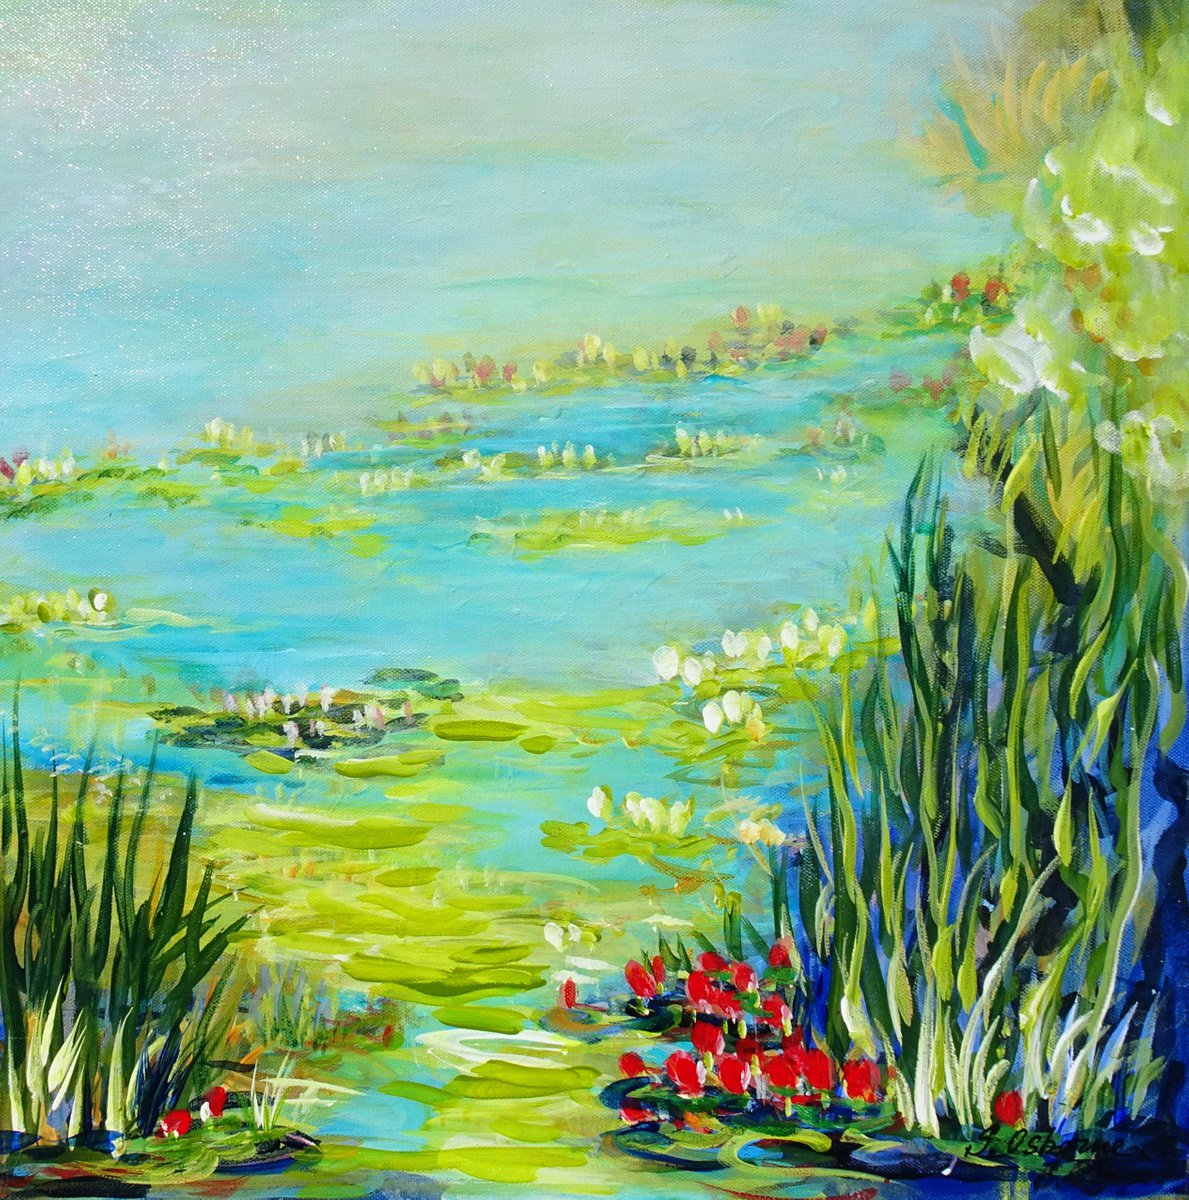 WATER LILY POND. WATER REFLECTIONS. Modern Impressionism inspired by Claude Monet Water-l... by Sveta Osborne